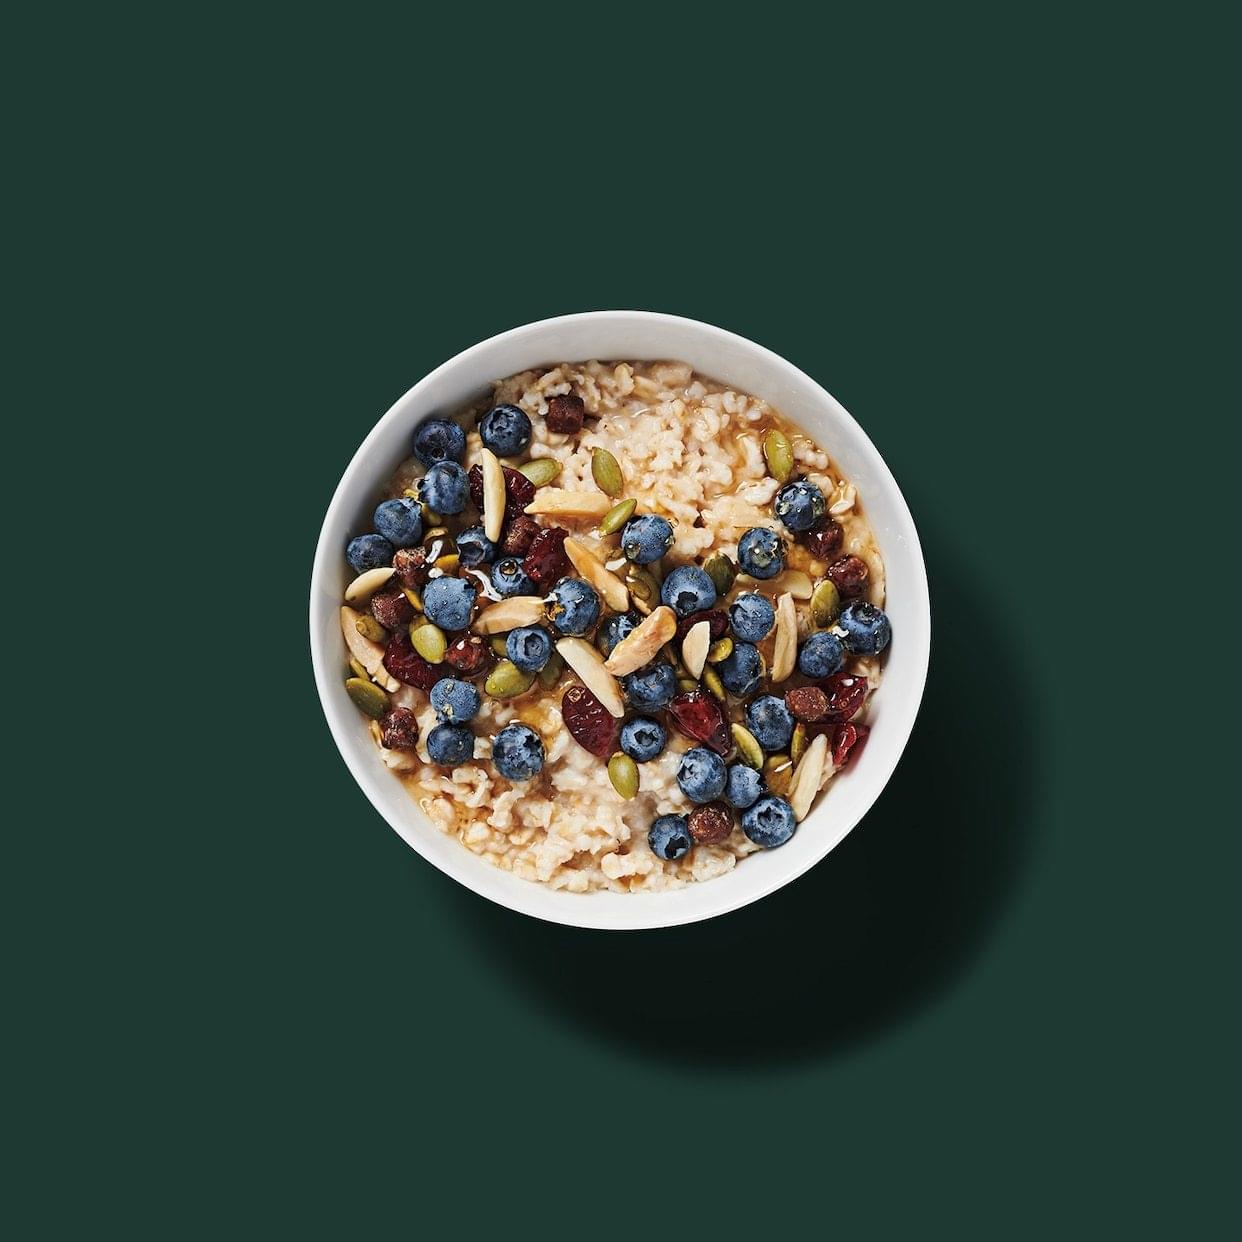 Starbucks Hearty Blueberry Oatmeal Nutrition Facts